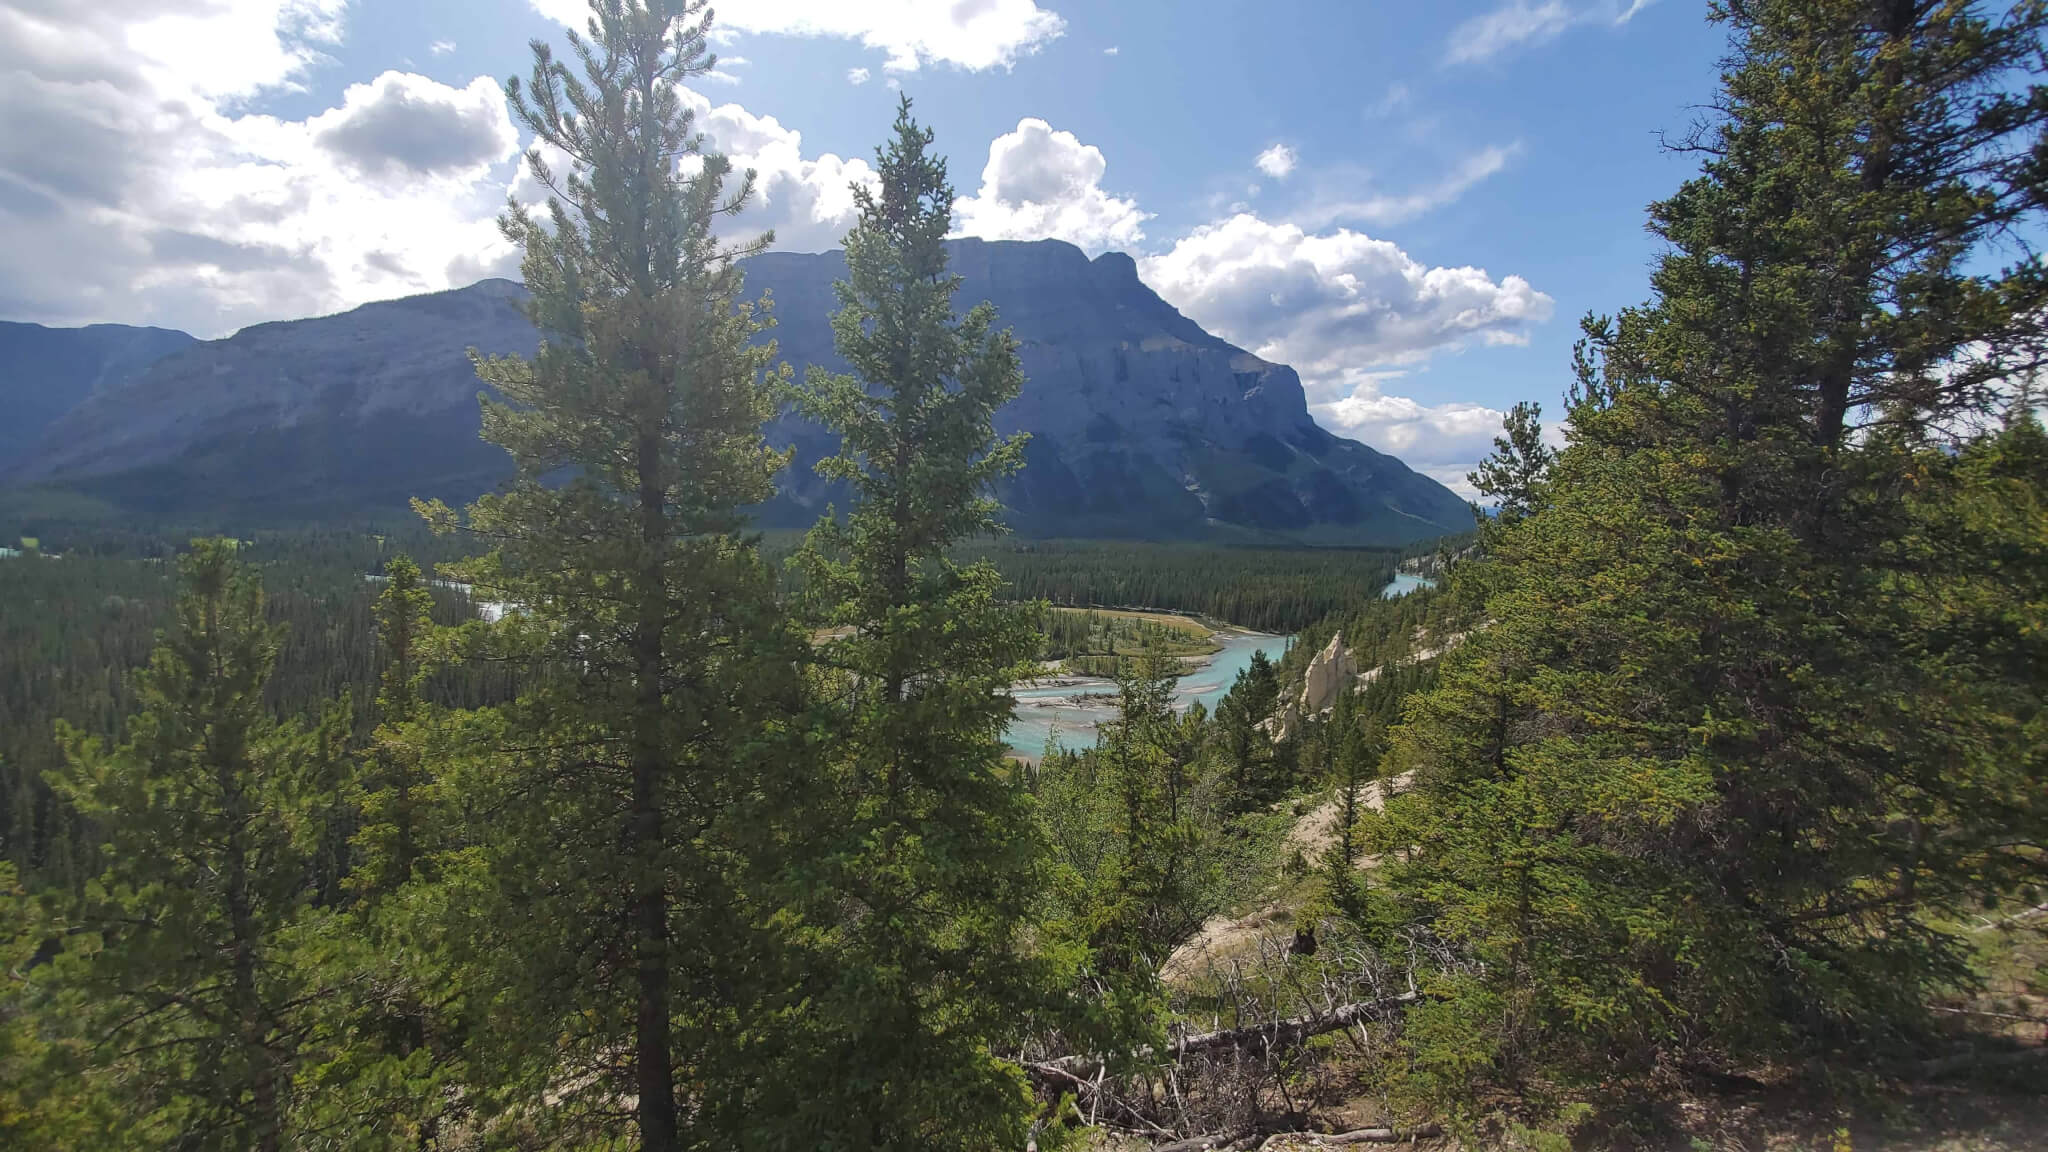 Looking for something great to do in Banff?